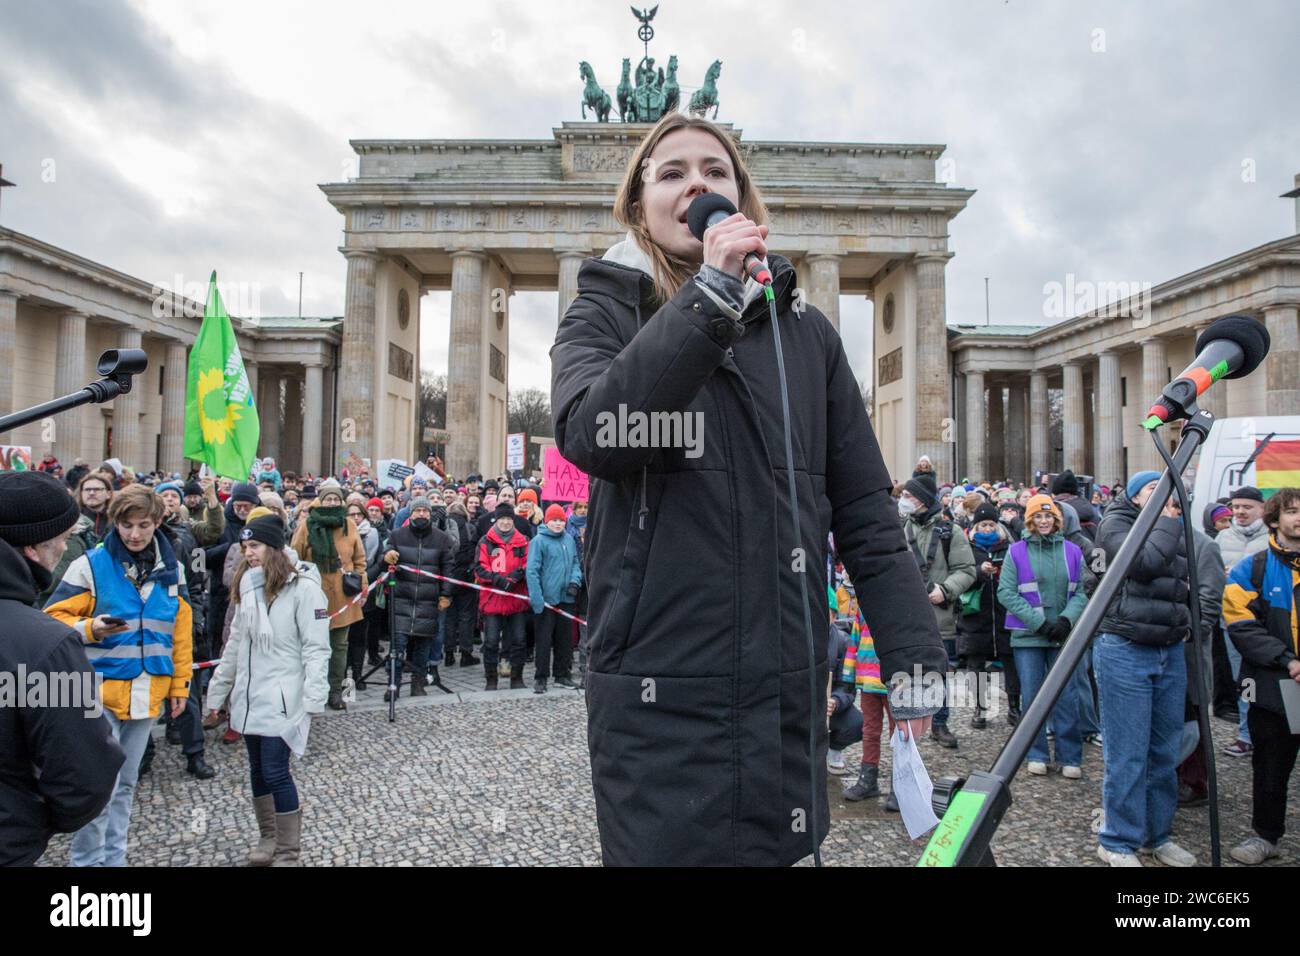 Berlin, Germany. 14th Jan, 2024. Luisa Neubauer delivered a speech at the protest. Neubauer, born on April 21, 1996, in Hamburg, is a prominent German climate activist and publicist known for leading Germany's Fridays for Future movement. As a significant figure in climate activism, Neubauer advocates for policies aligned with the Paris Agreement and has been a vocal proponent of Germany's transition from coal by 2030. Her Alliance 90/The Greens and the Green Youth membership reflects her deep commitment to environmental issues. In an unparalleled show of solidarity, the streets of Berlin on Stock Photo